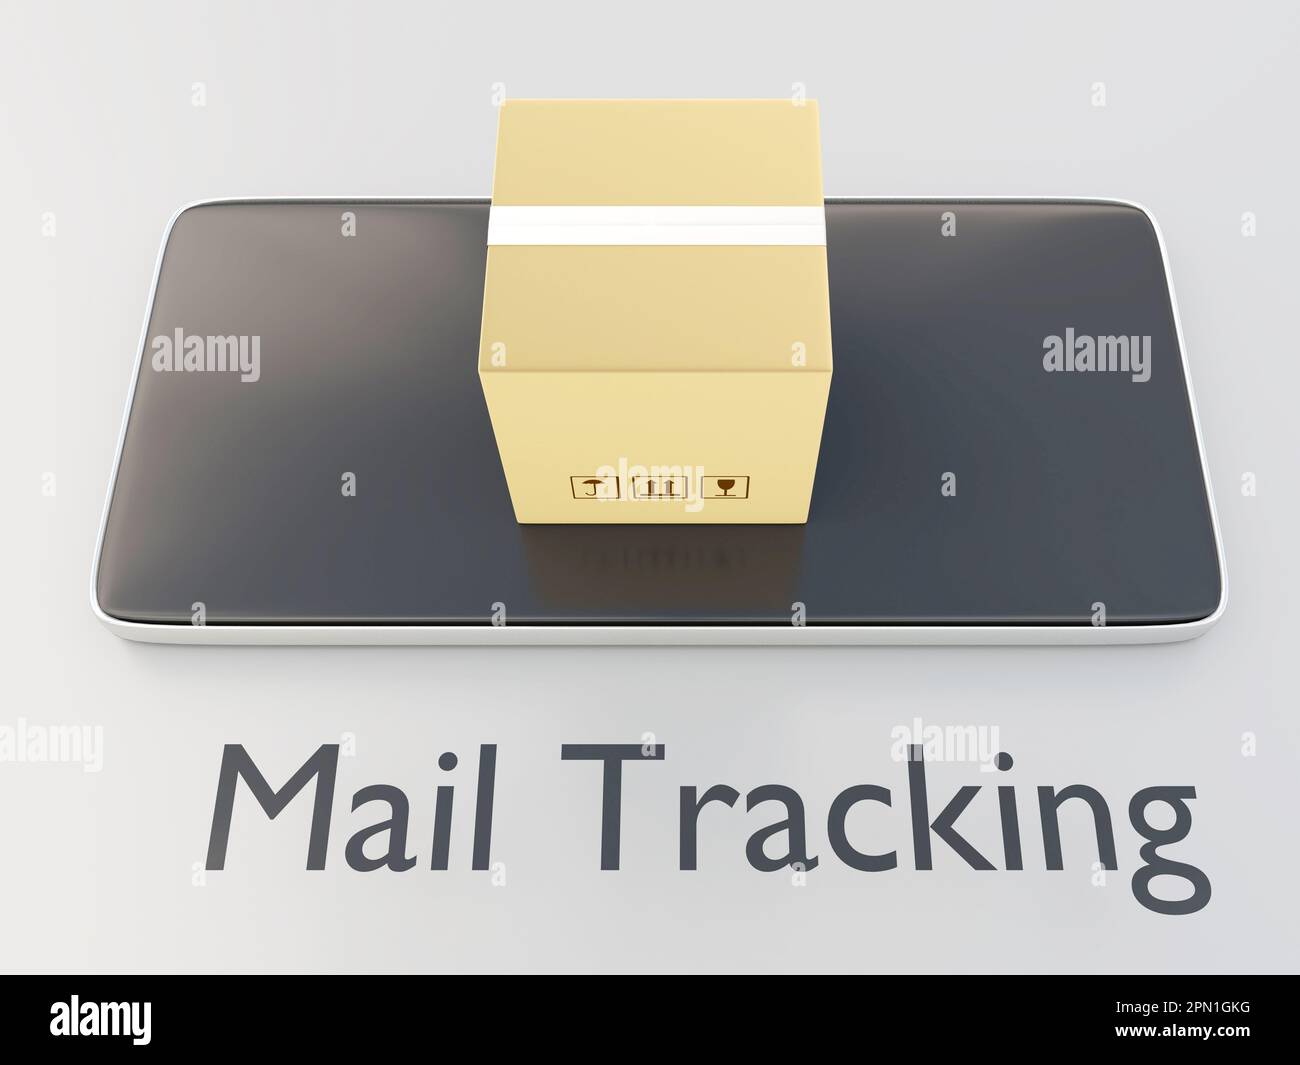 3D illustration of carton box on the screen of a cellulr phone with the text Mail Tracking, isolated over gray. Stock Photo